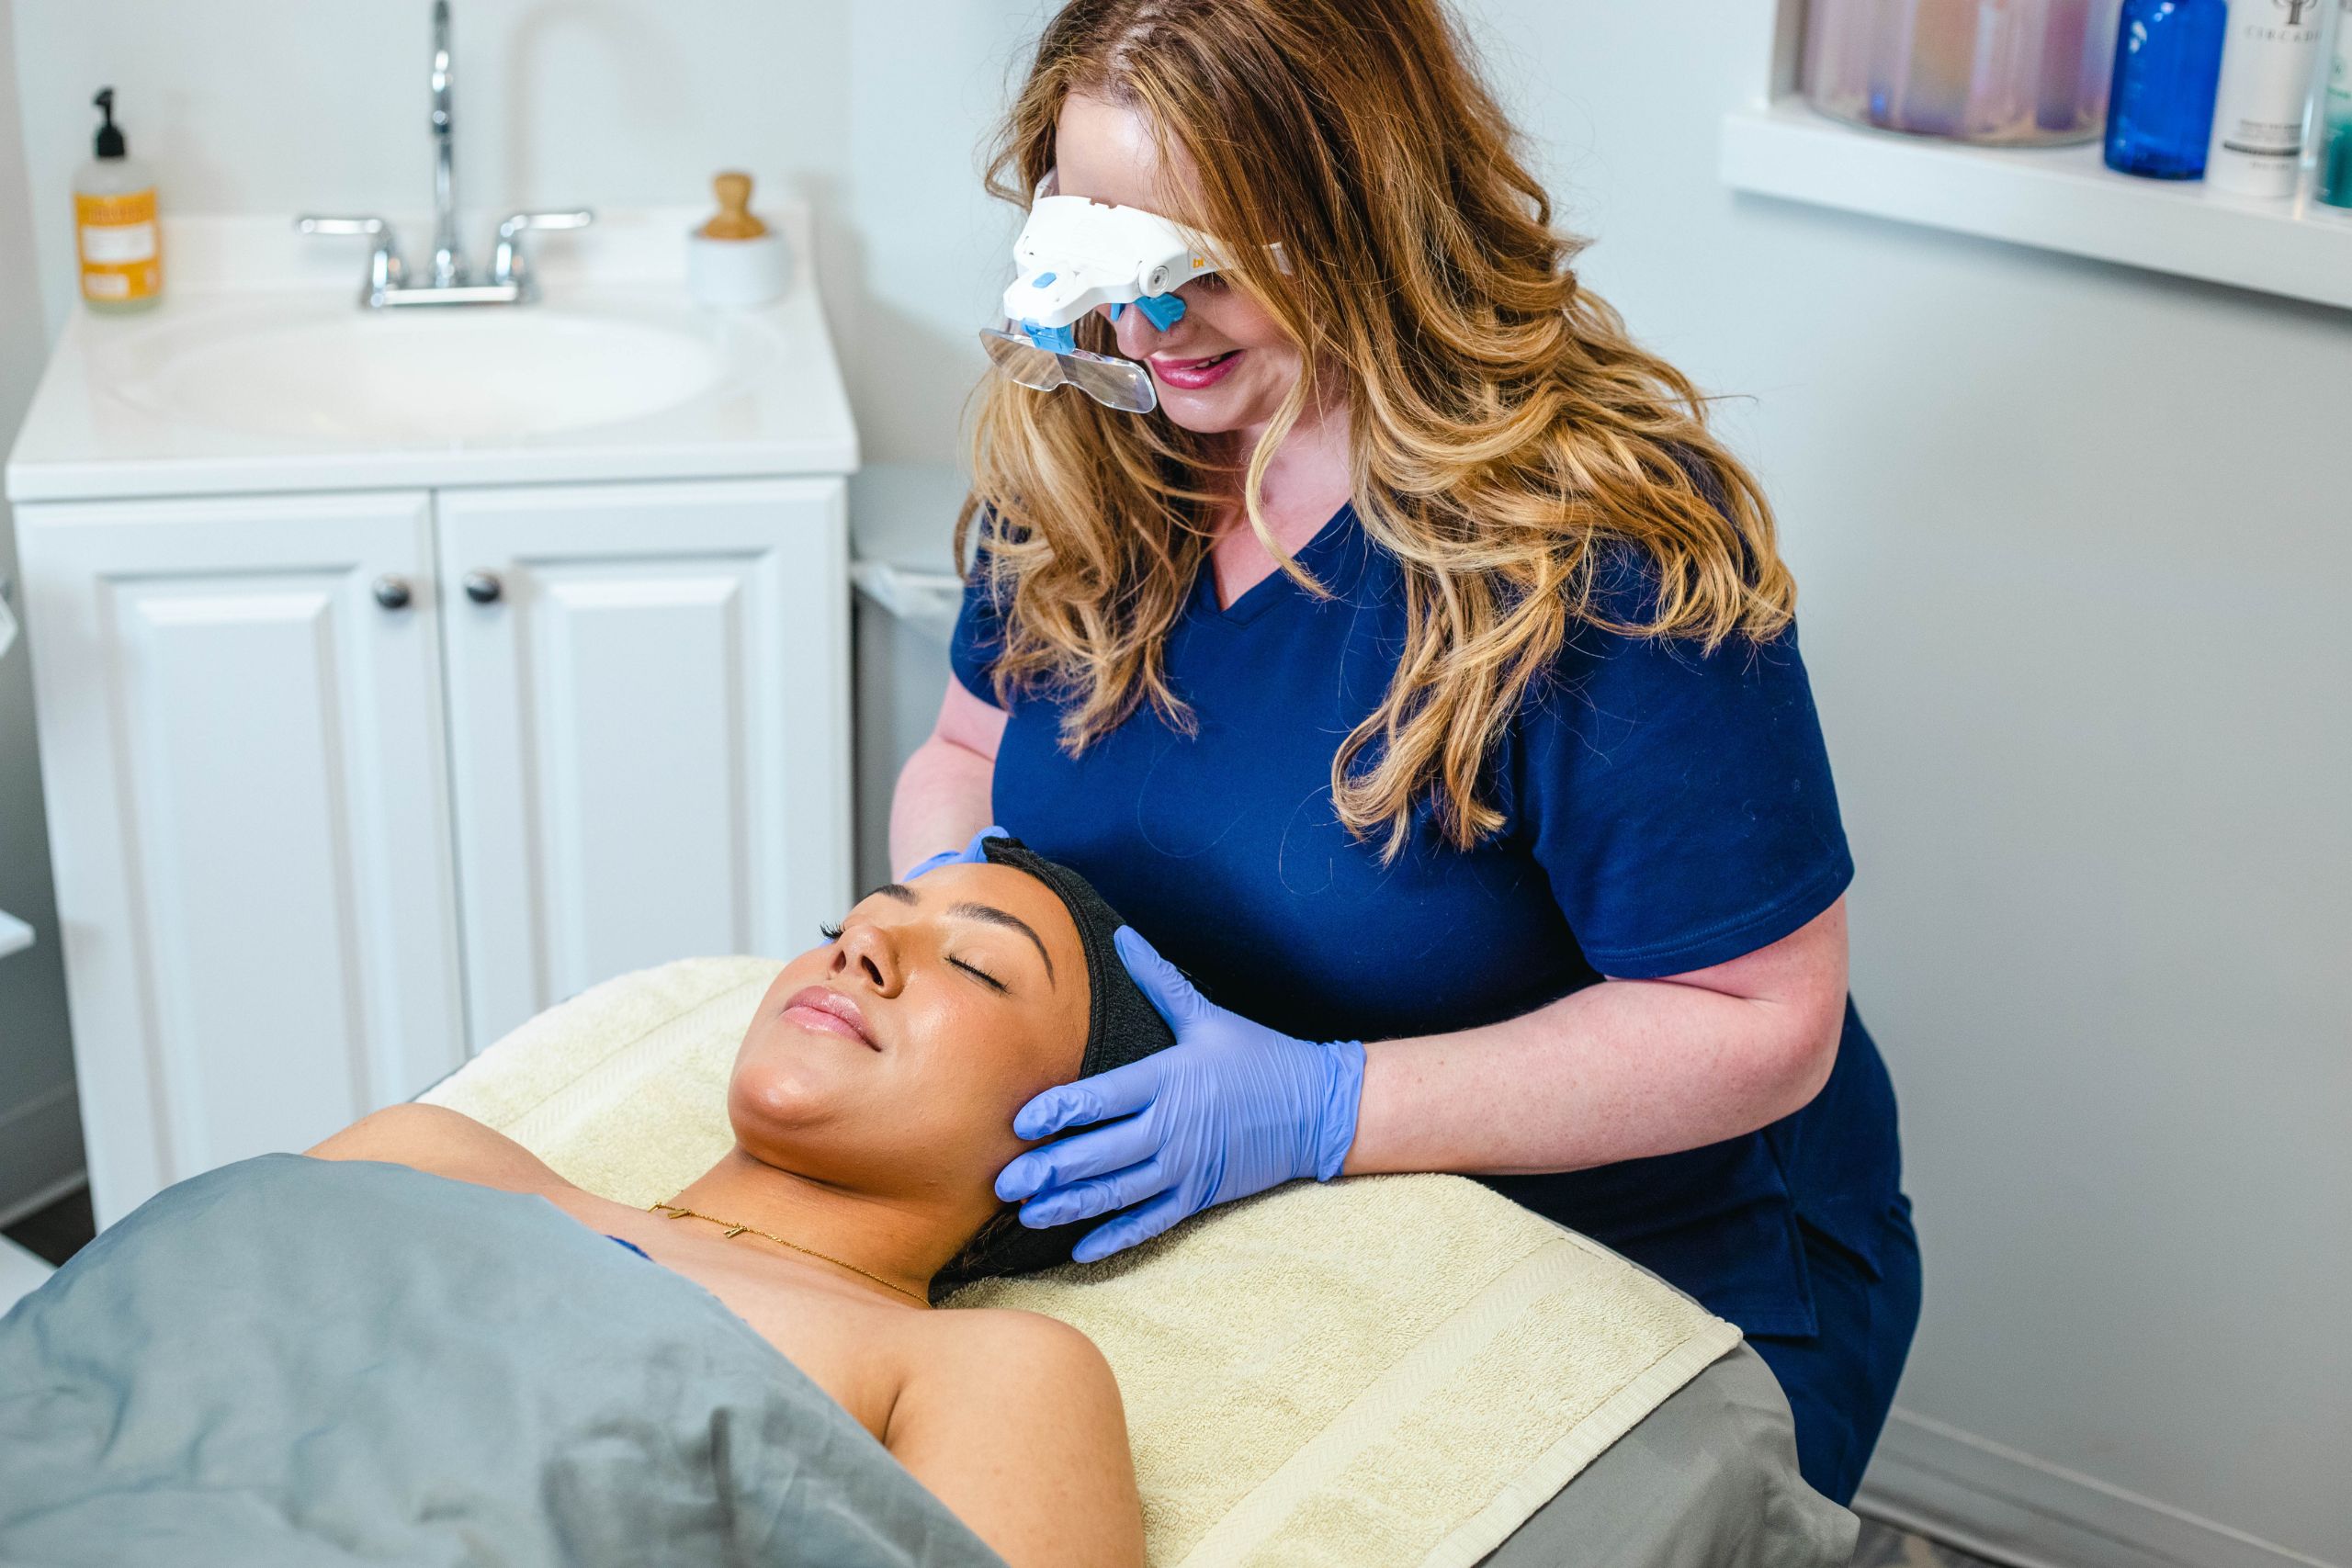 A medspa doctor holds a patient's head while she examines her face.